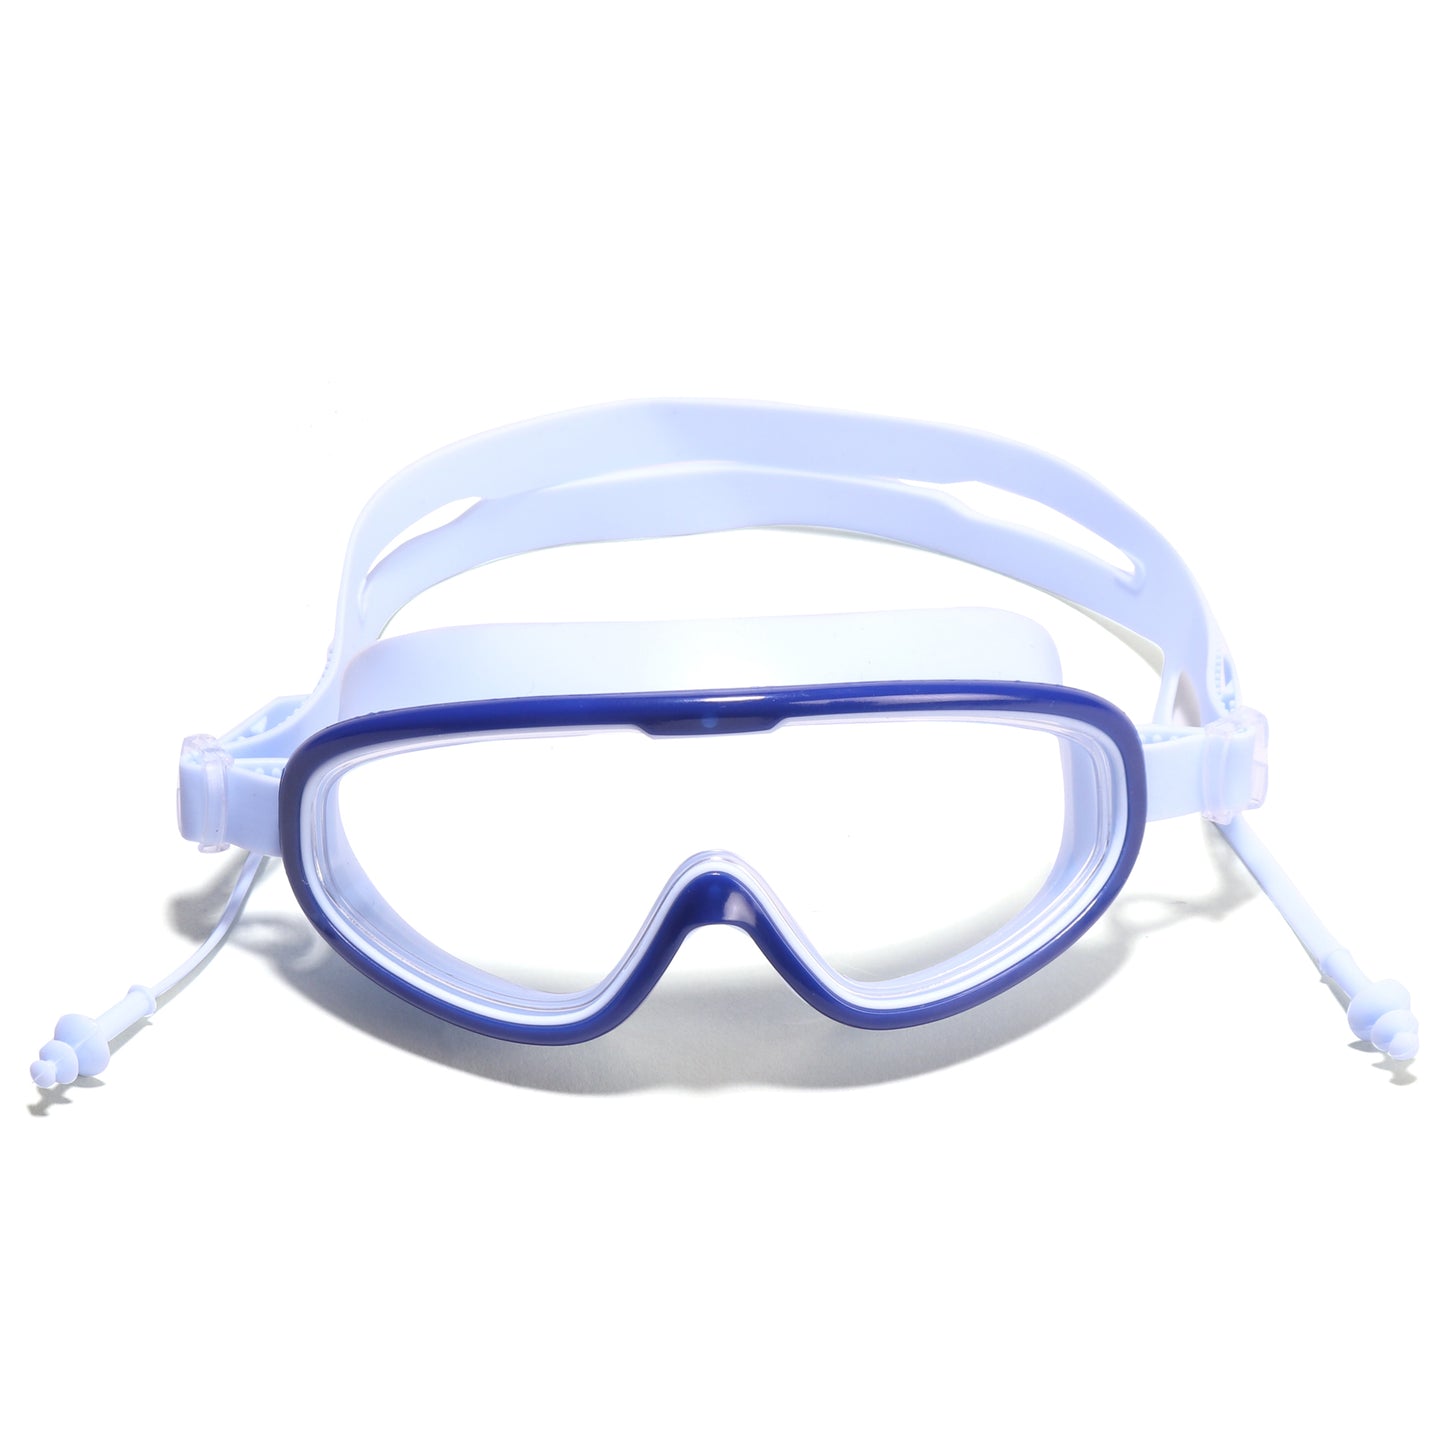 BIG FRAME SWIMMING GOGGLES WITH EAR PLUGS - BLUE